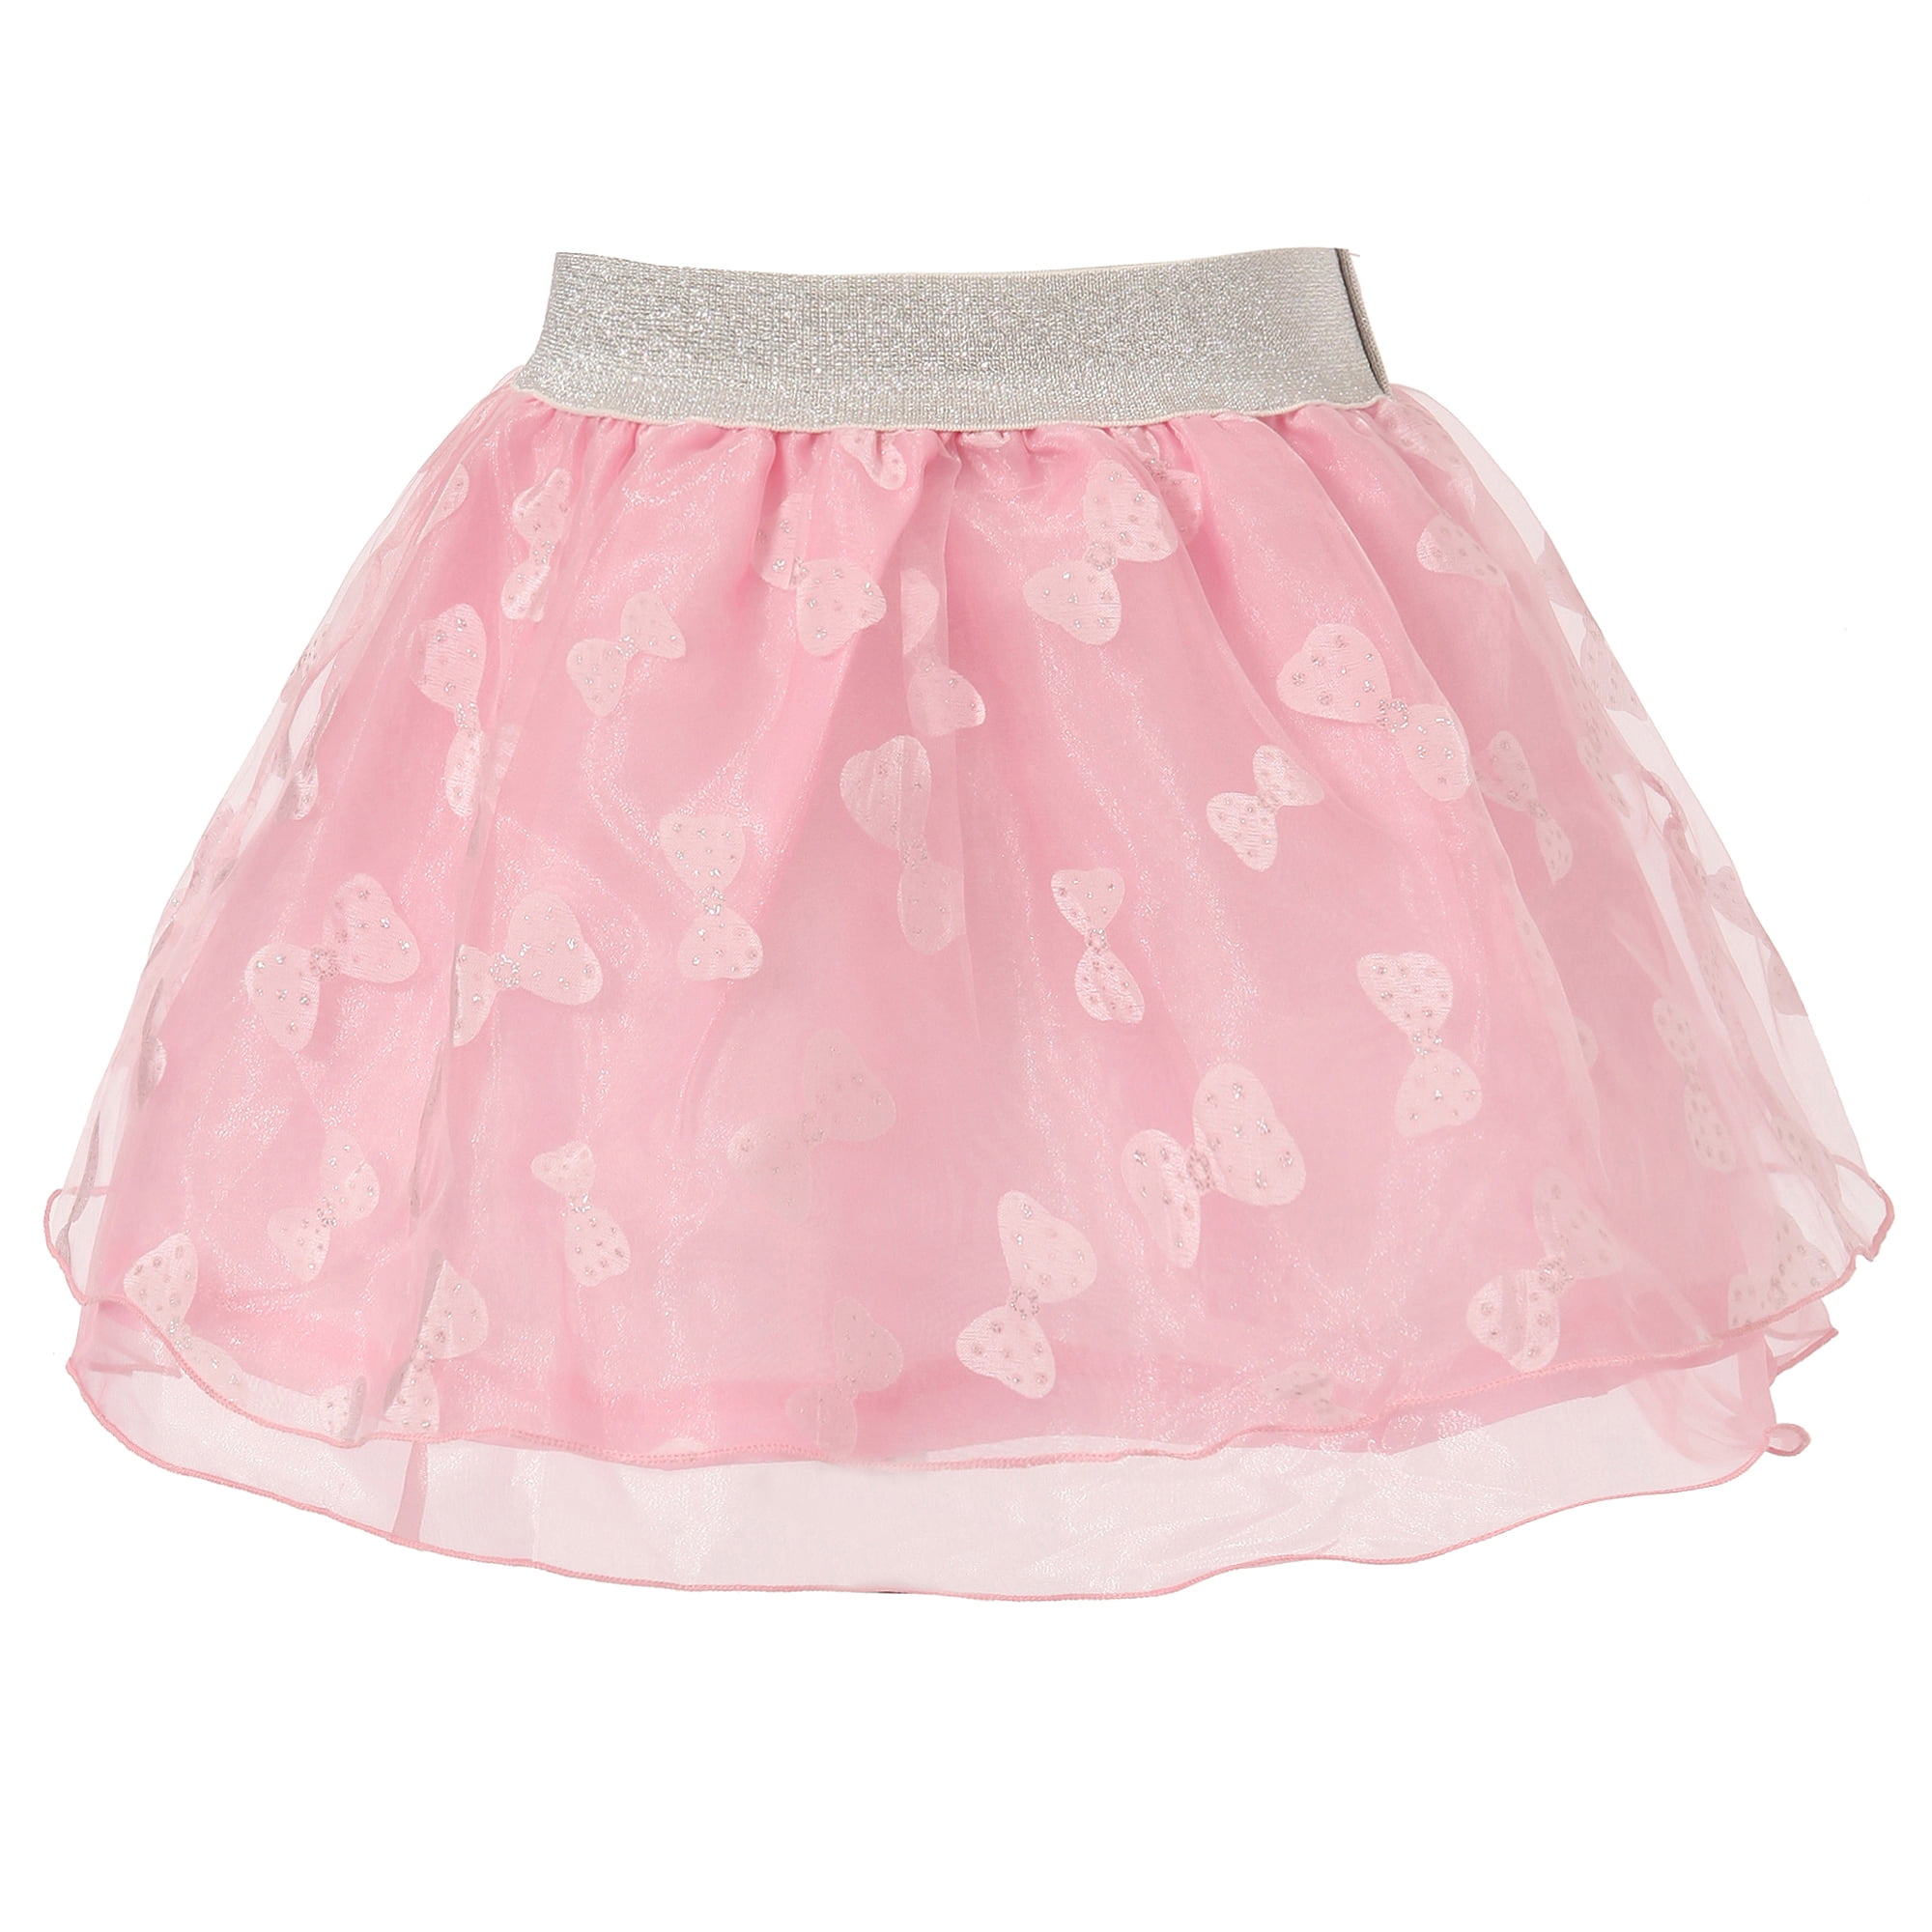 Richie House - Richie House Girls' Tulle Skirt with Bow Print and ...